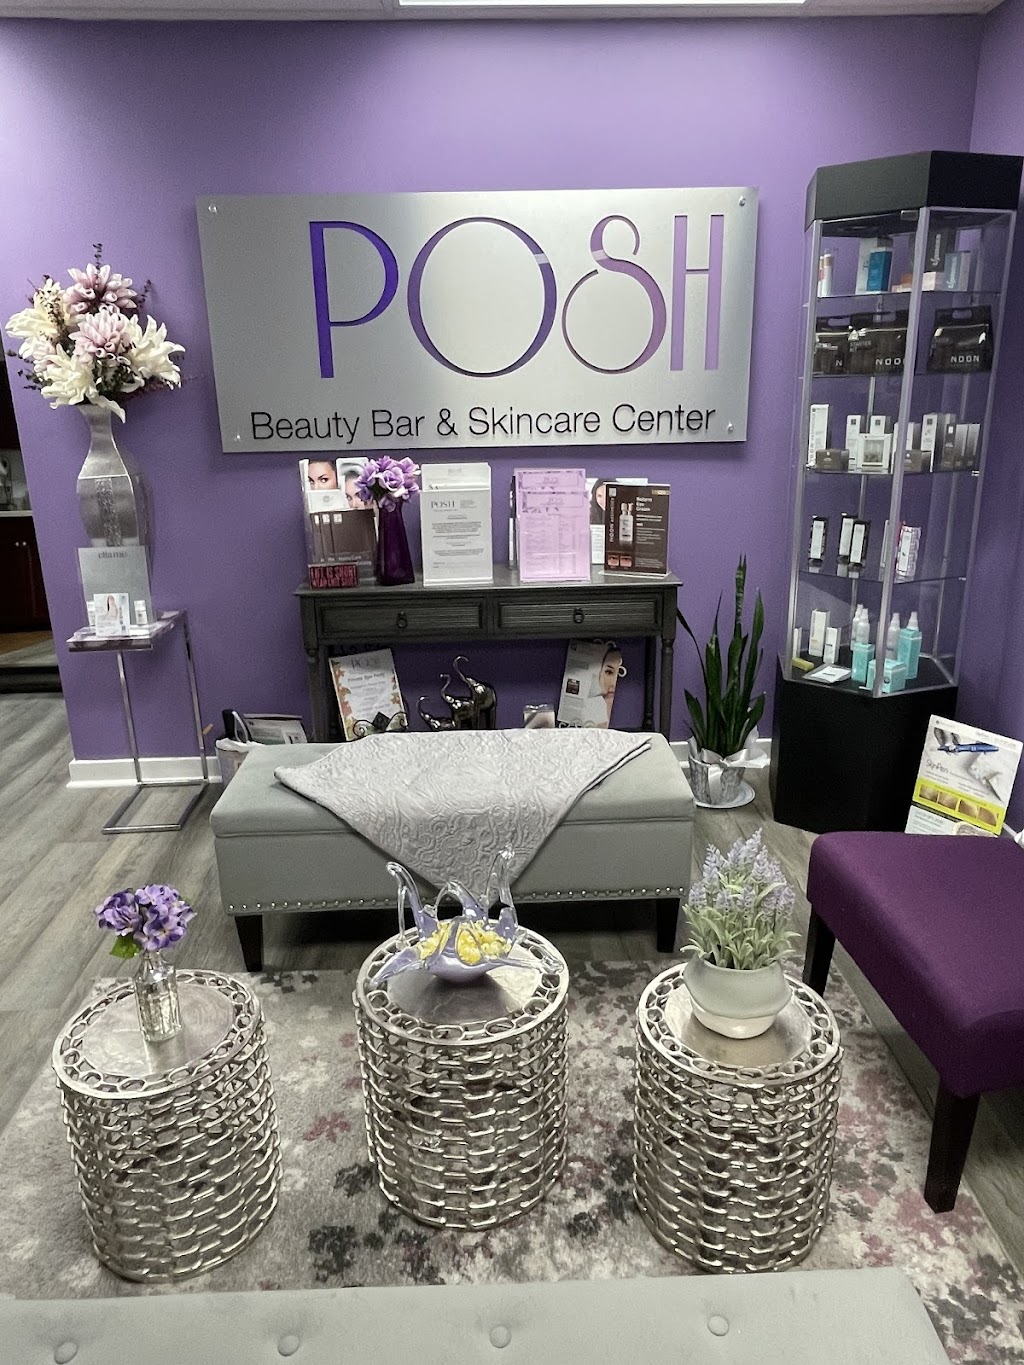 POSH Beauty Bar Spa and Skin Care Center | 638 Newtown Yardley Rd Suite 1G, Newtown, PA 18940 | Phone: (267) 568-2746